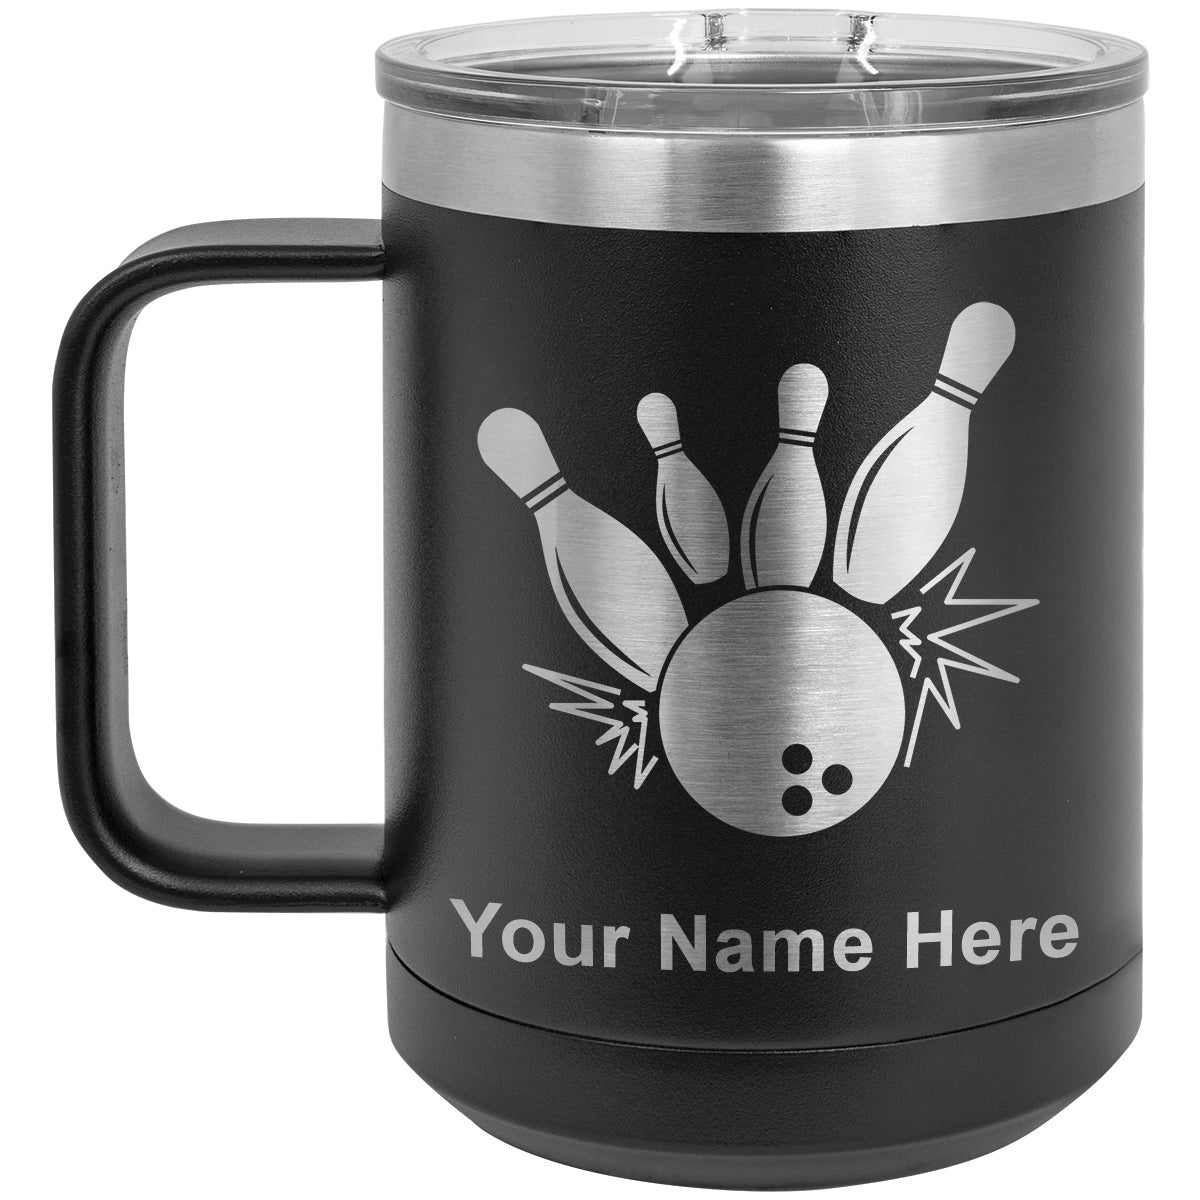 Personalized Insulated Coffee Mug with Lid - 12 oz -Customize with Name or  Text - Custom Travel Cup